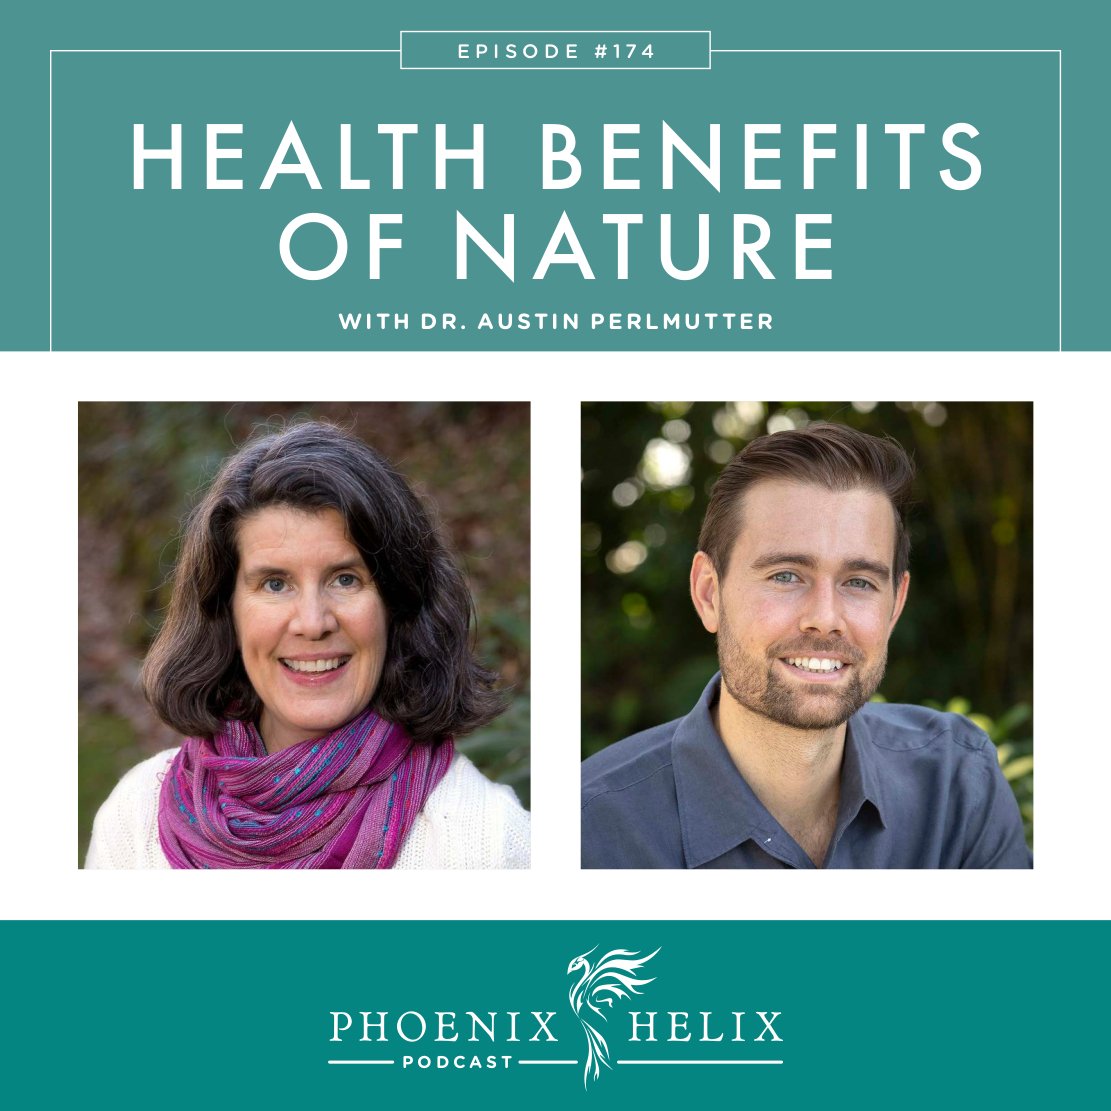 Health Benefits of Nature with Dr. Austin Perlmutter | Phoenix Helix Podcast